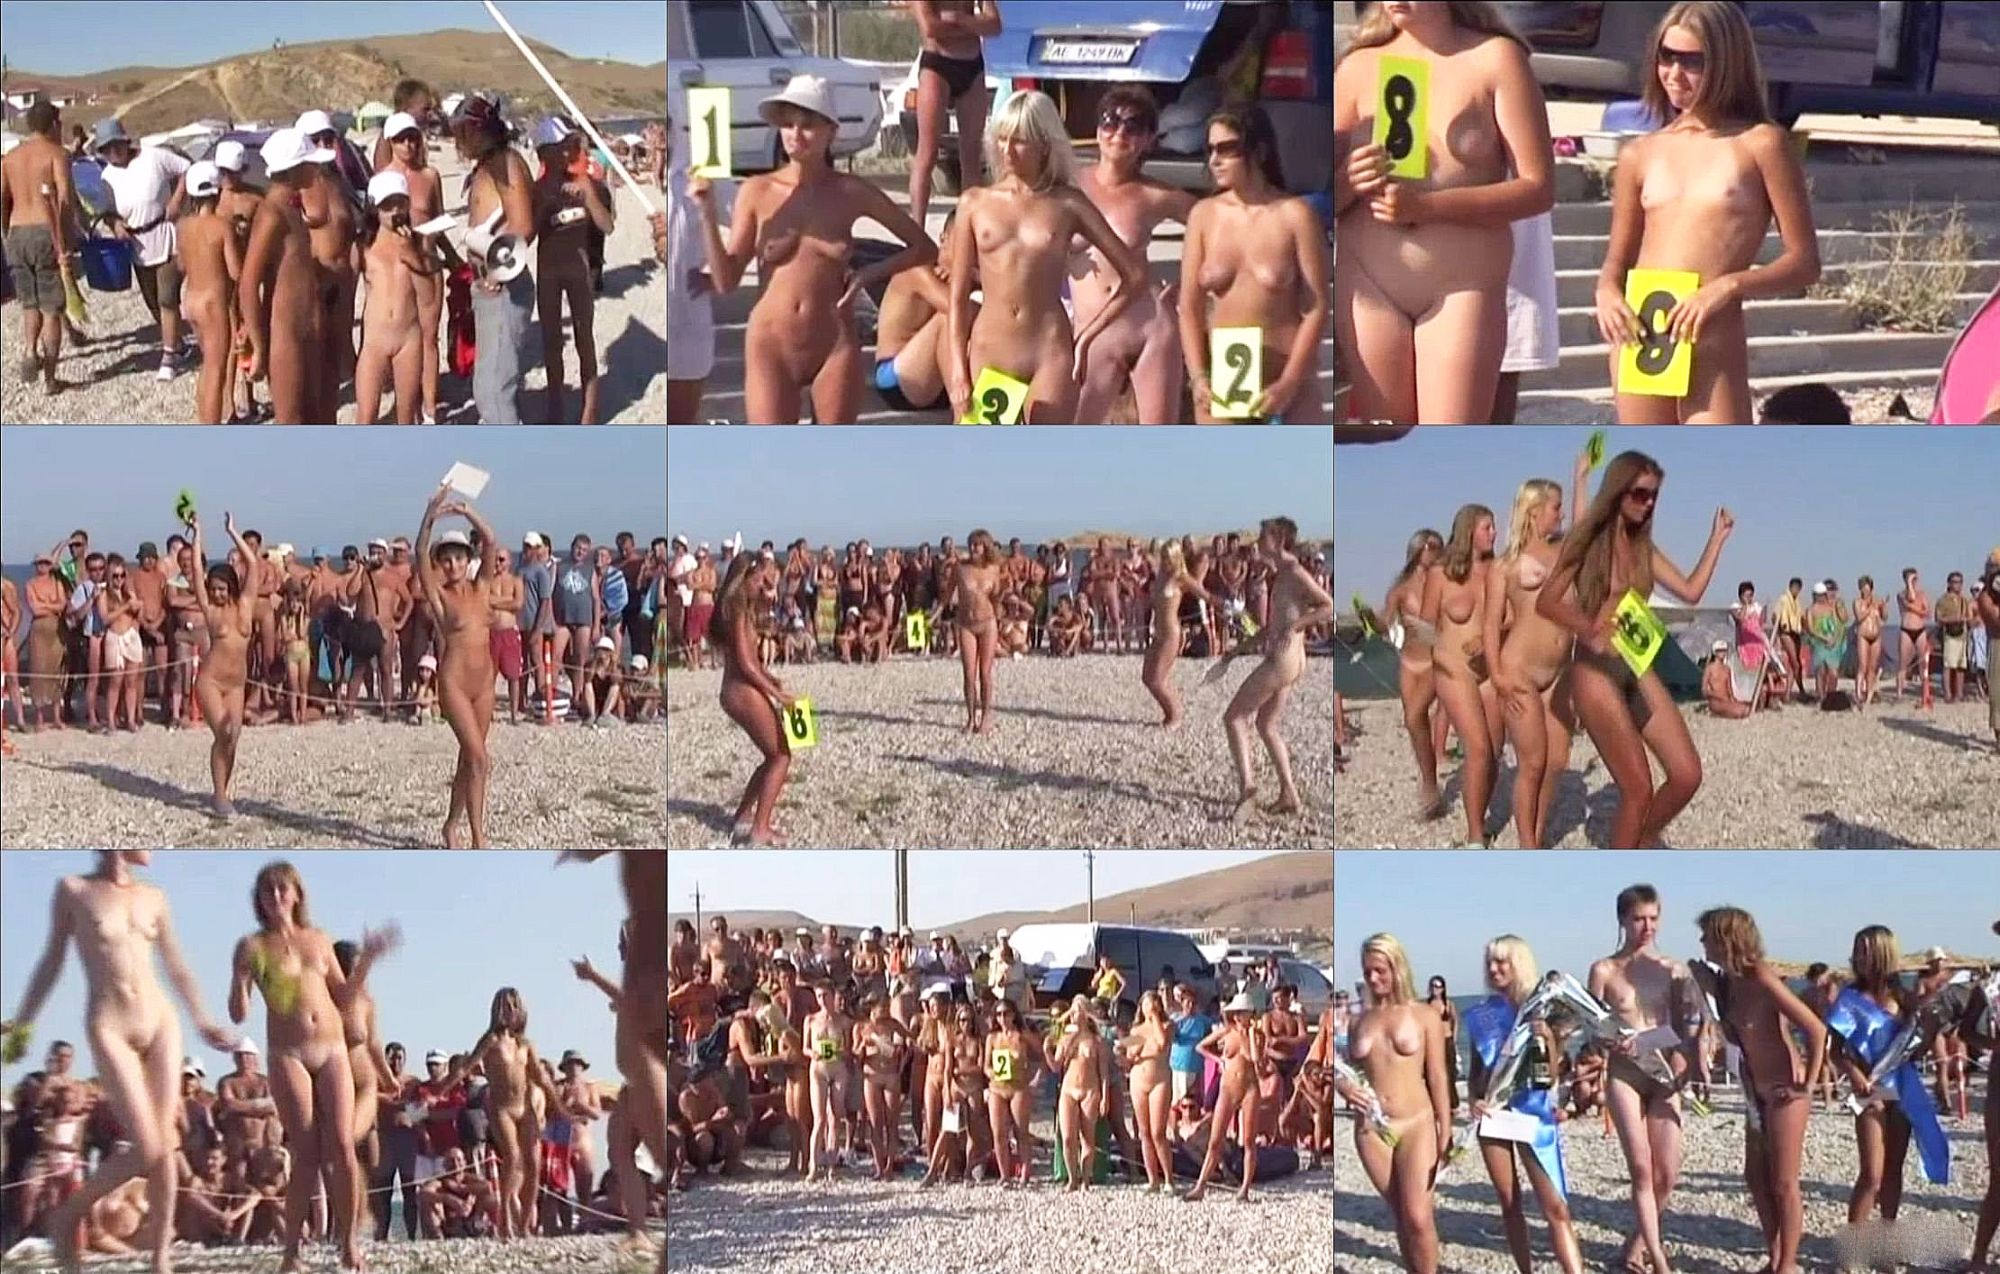 Nudism - Child beauty pageant part 2